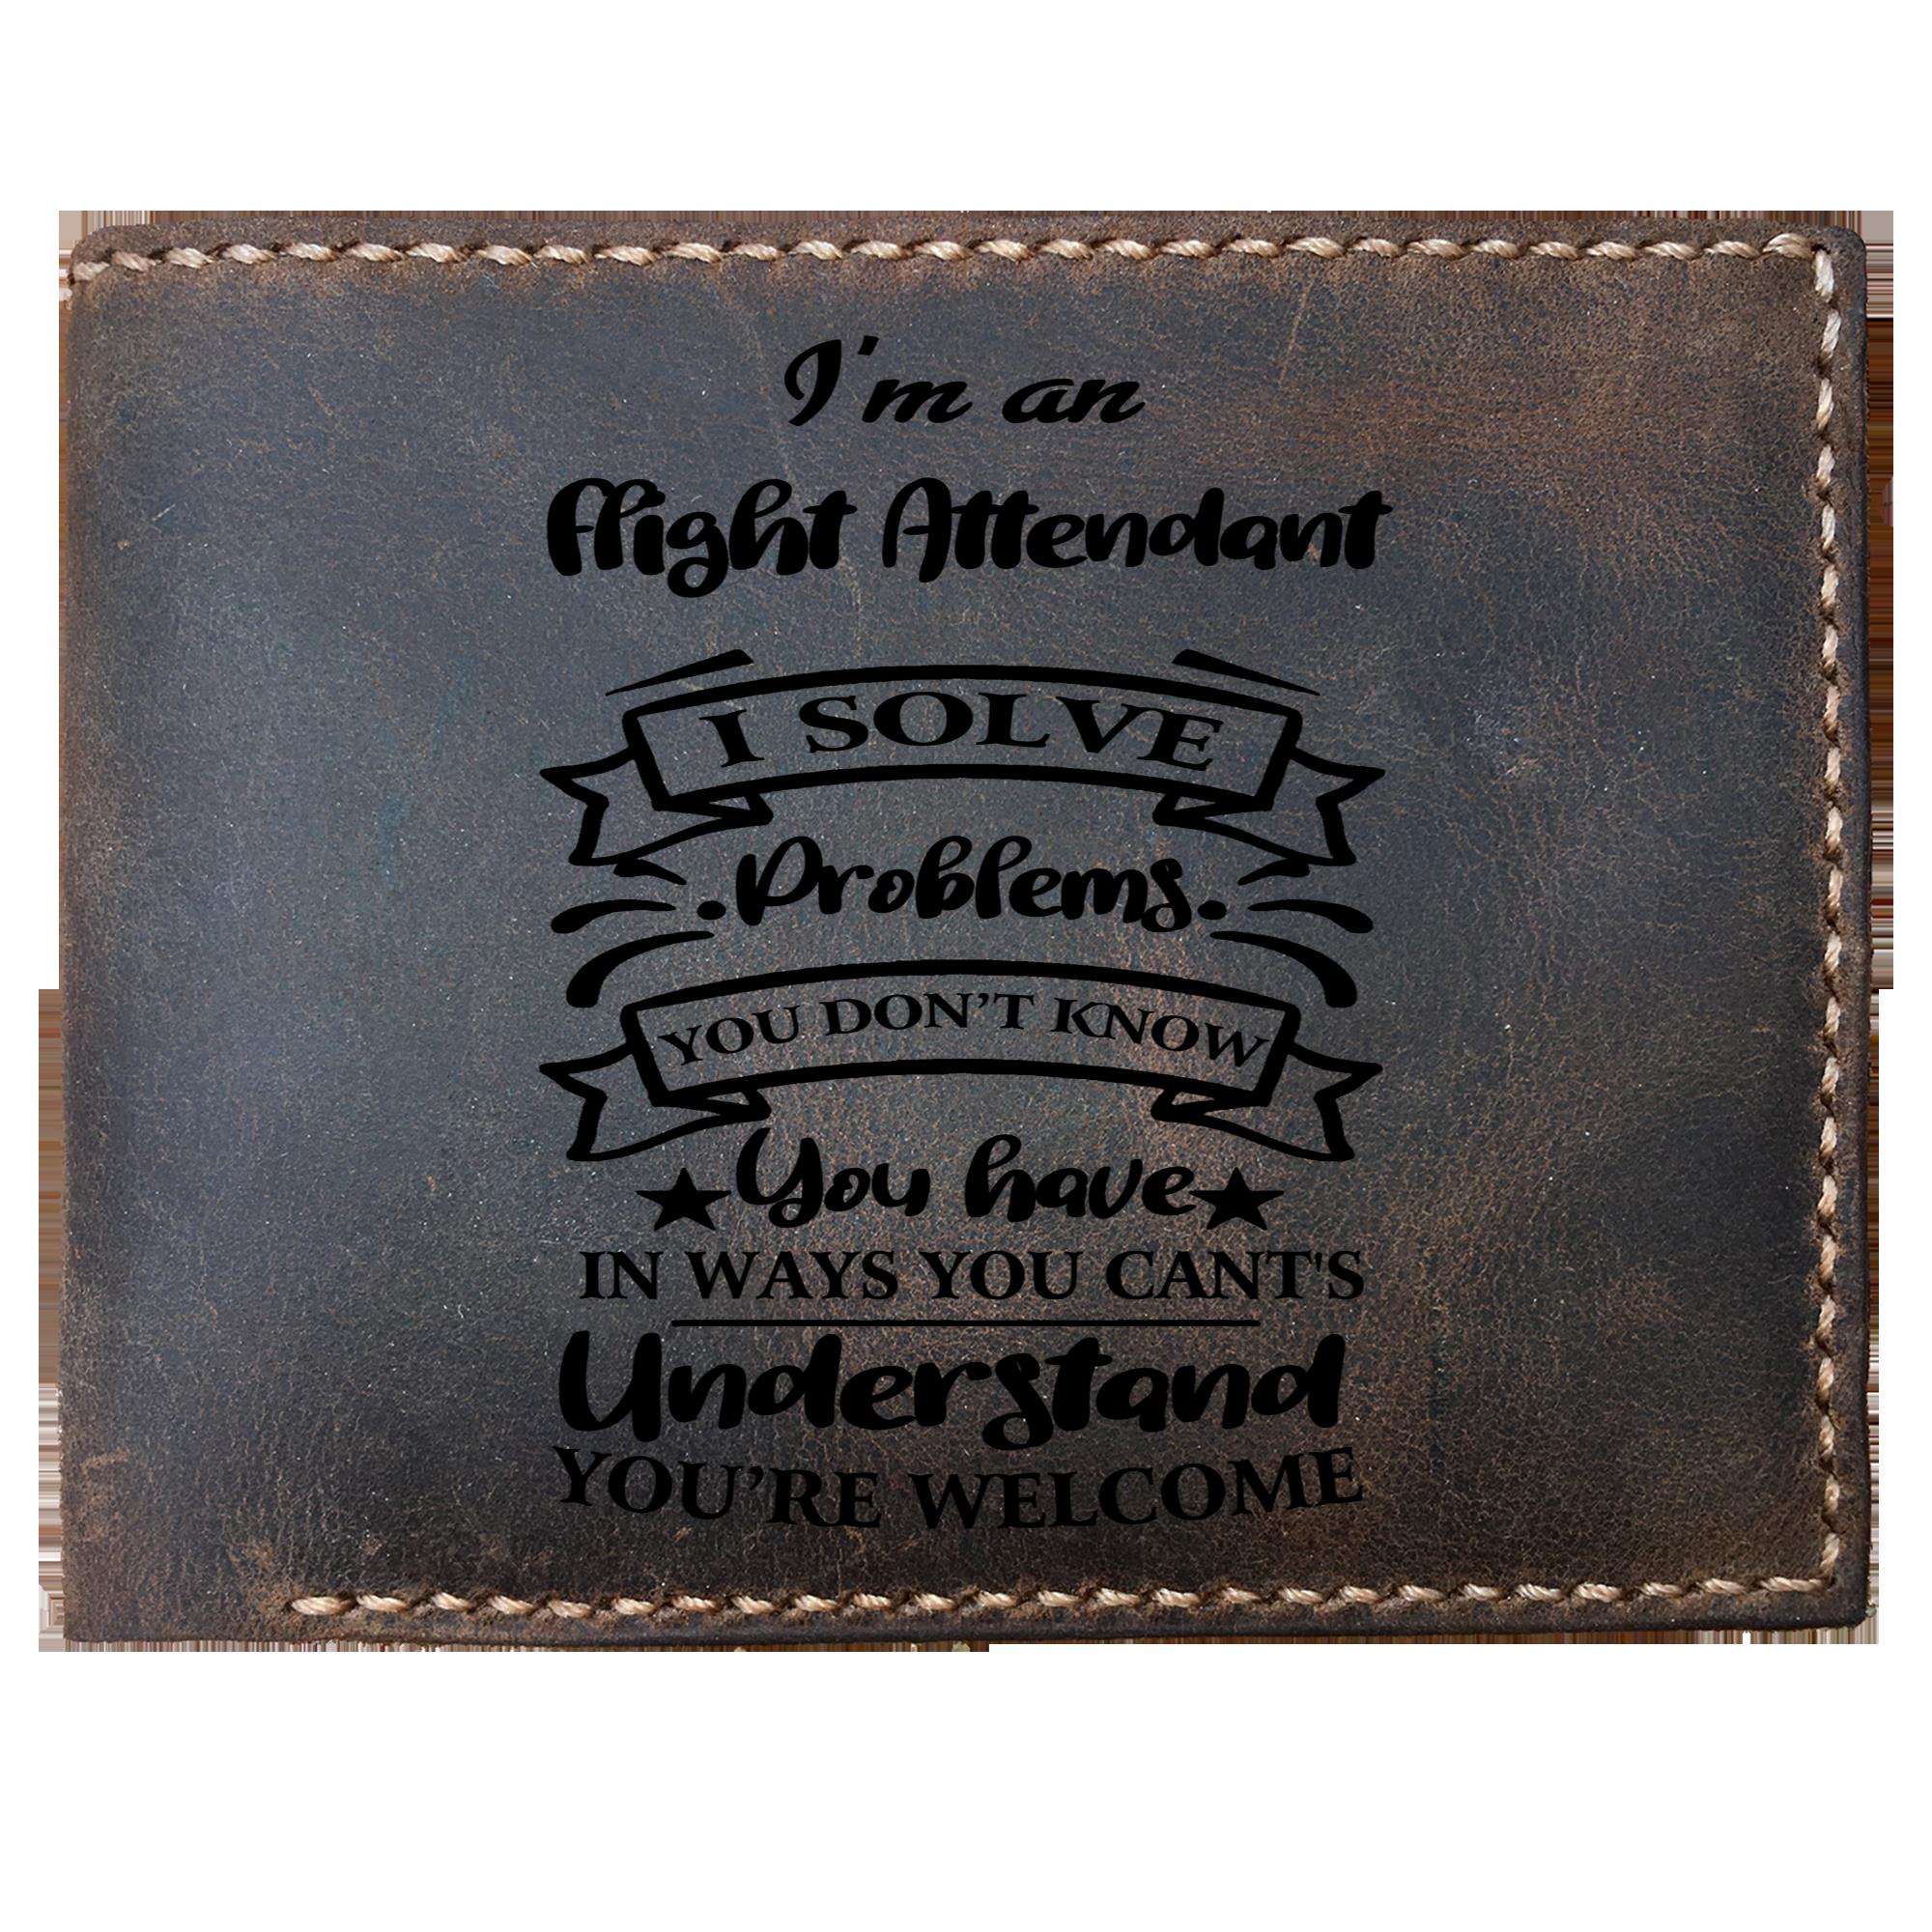 Skitongifts Funny Custom Laser Engraved Bifold Leather Wallet For Men, I'm an Flight Attendant Solve Problems, Father's Day Gifts